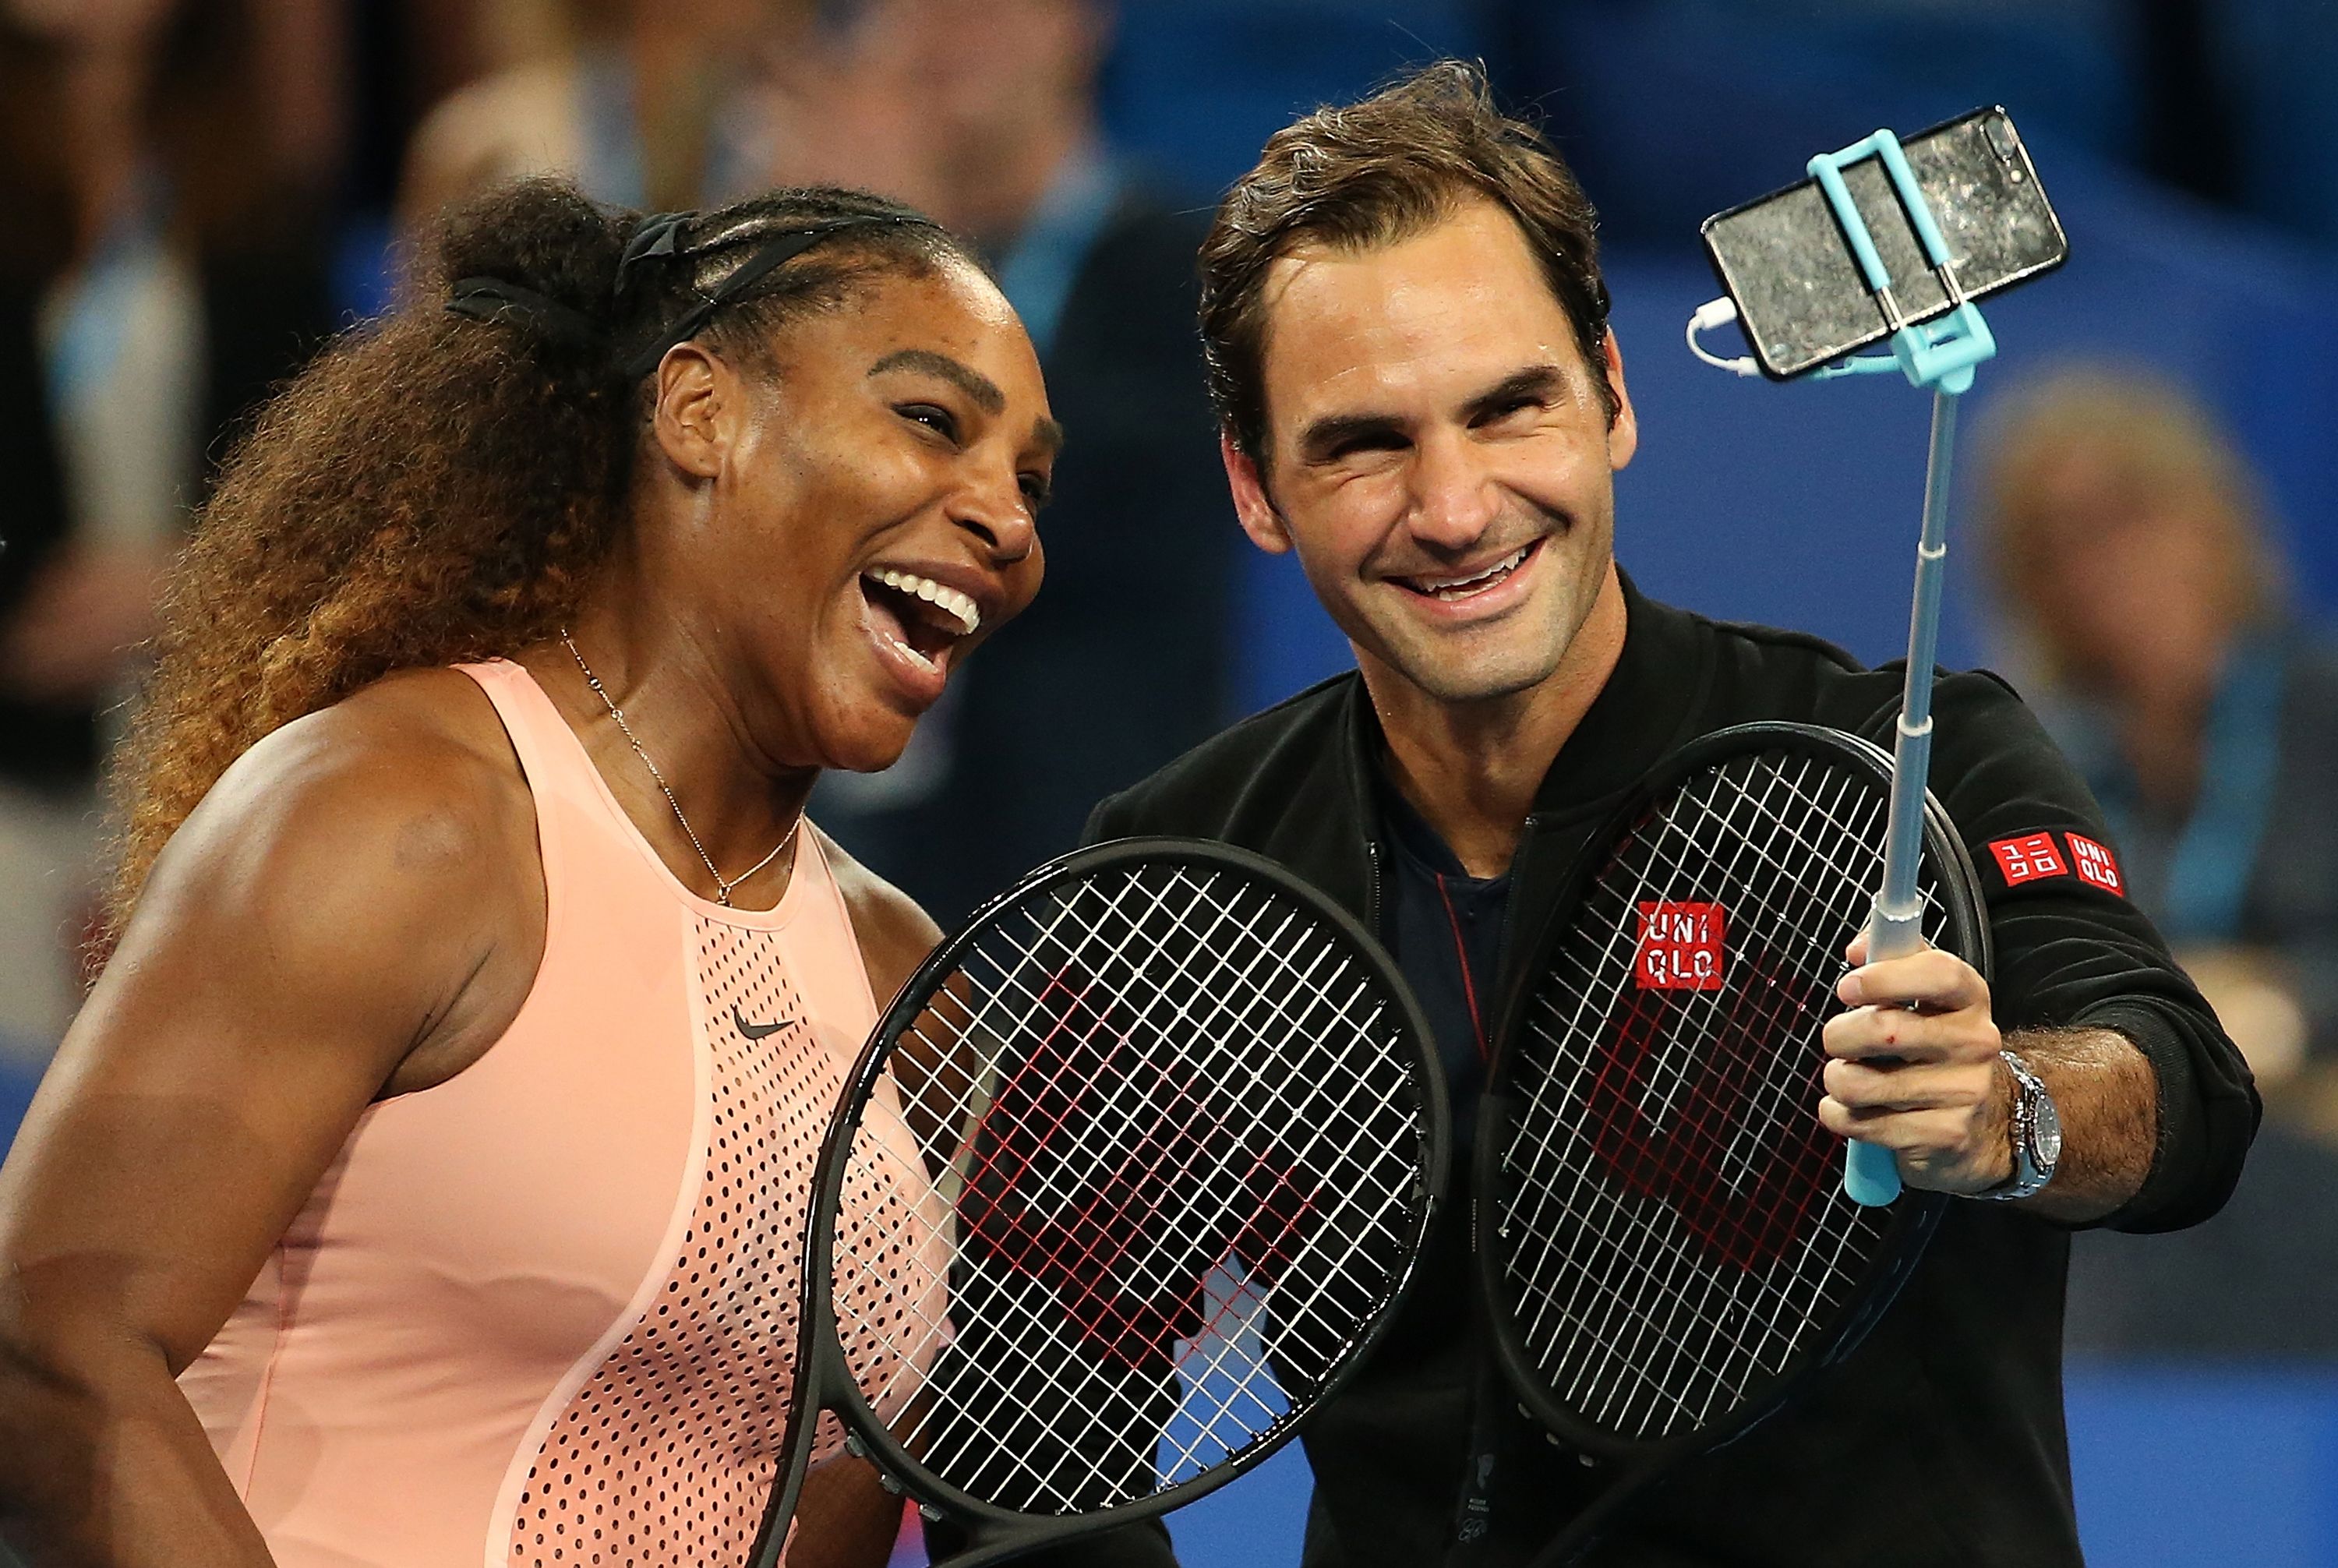 Serena Williams and Roger Federer at the 2019 Hopman Cup